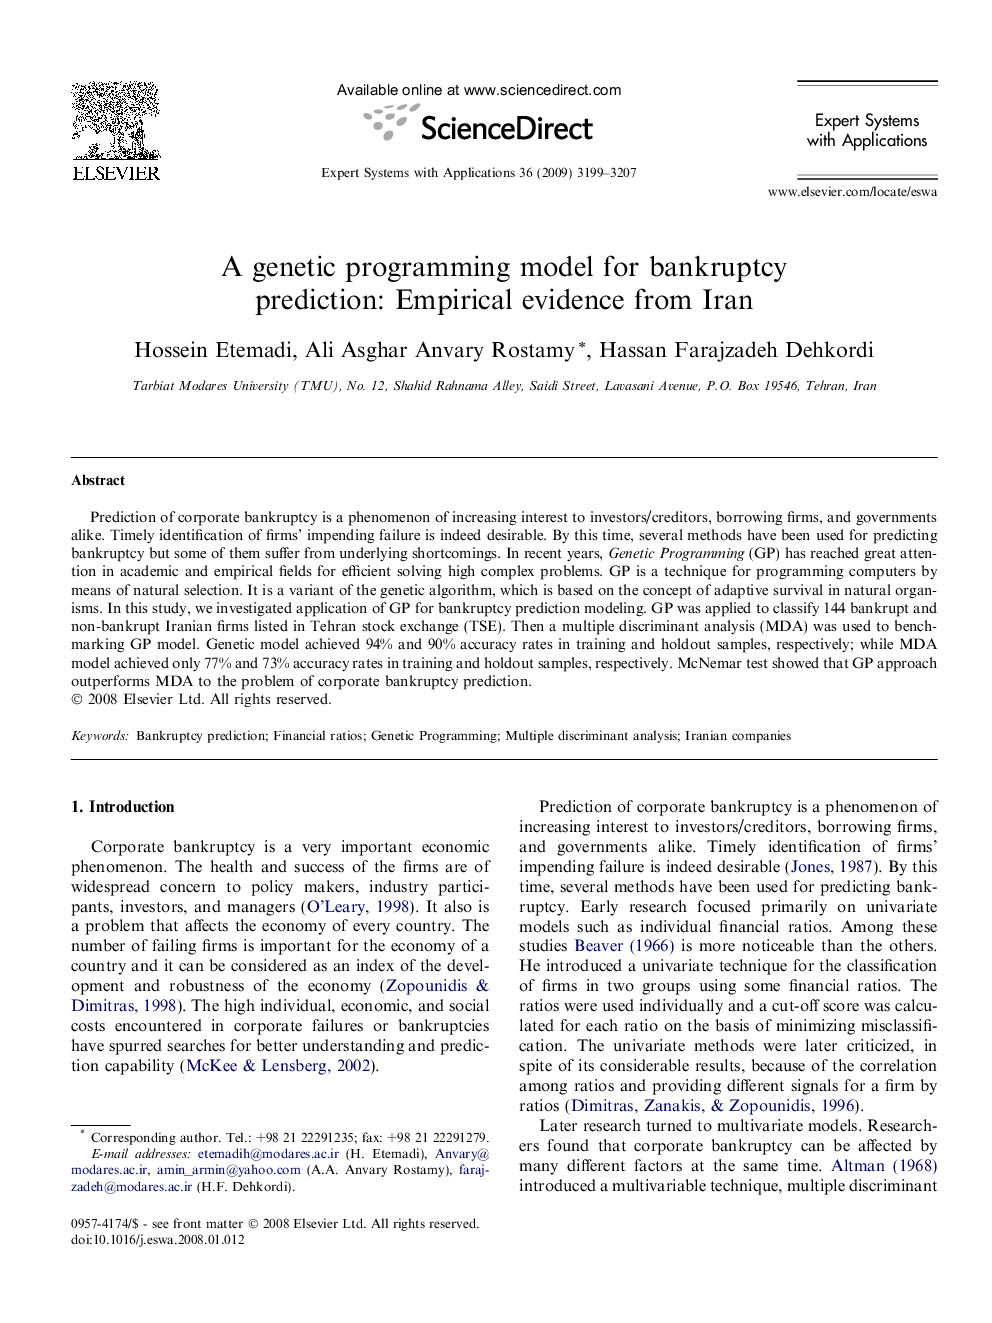 A genetic programming model for bankruptcy prediction: Empirical evidence from Iran